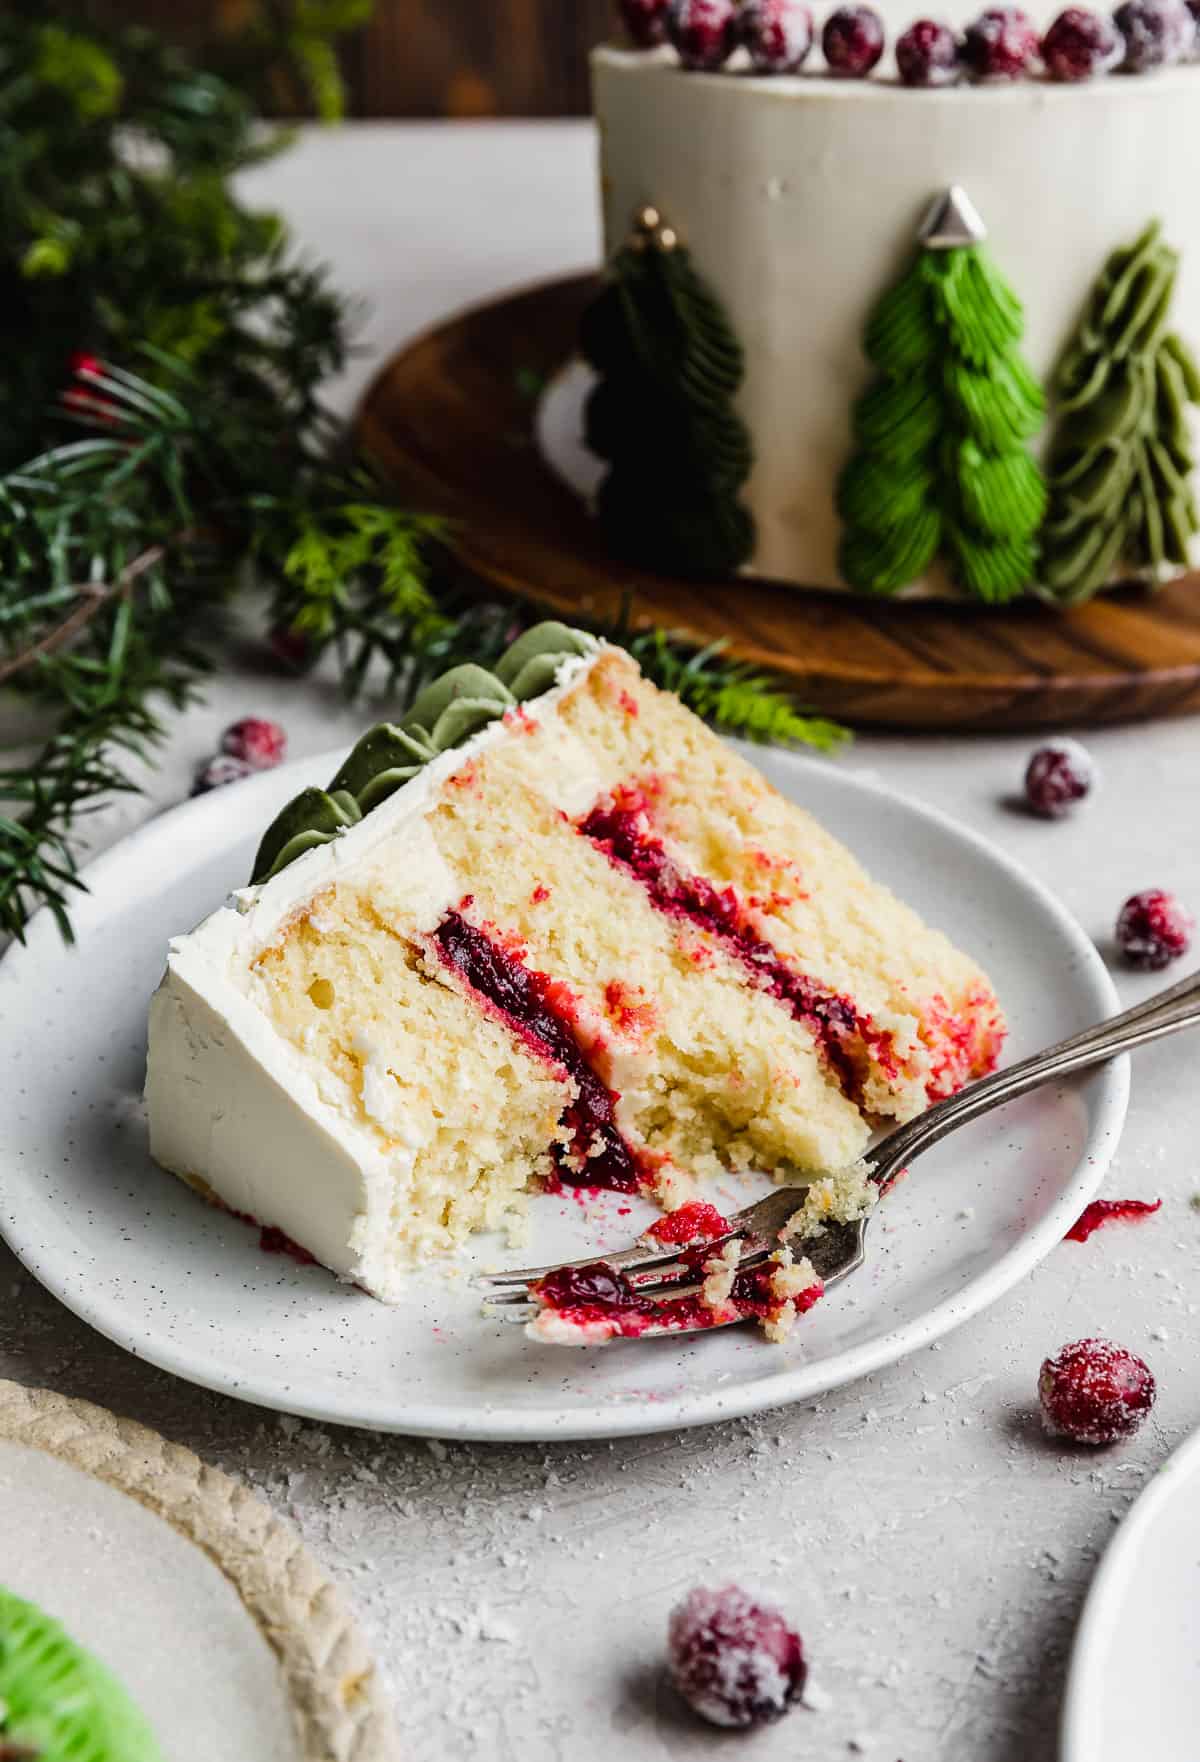 A slice of orange cranberry layer cake decorated with green Christmas trees along the edges, on a white plate.